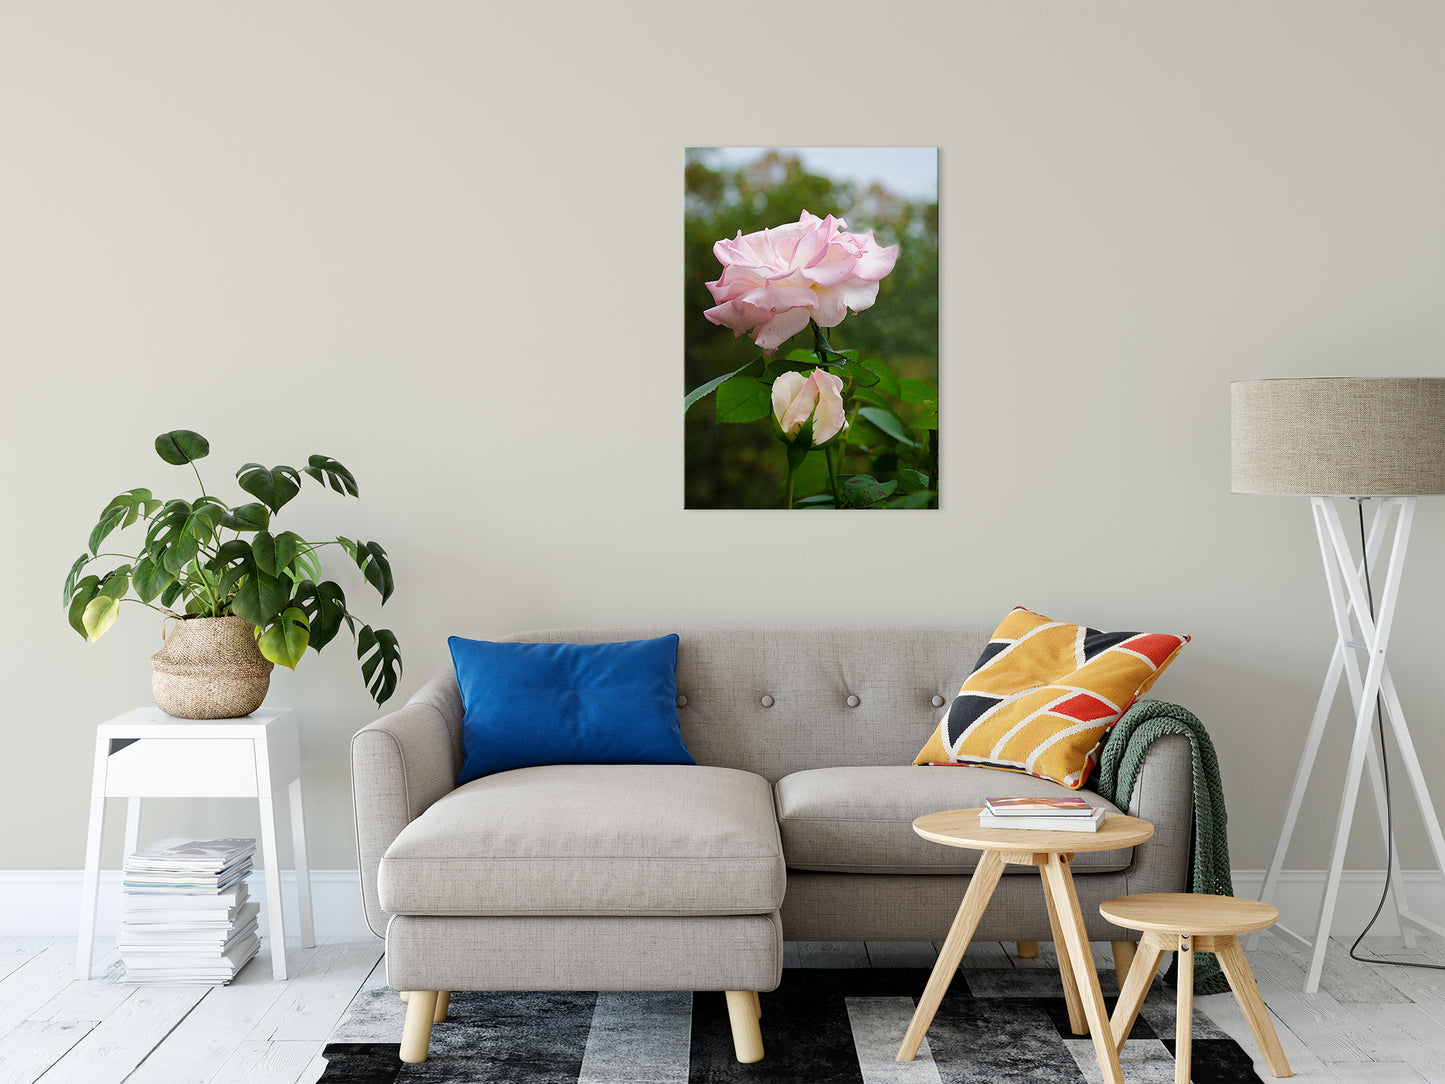 Rose Flower Wall Art: Admiration Nature / Floral Photo Fine Art Canvas Wall Art Prints 24" x 36" - PIPAFINEART